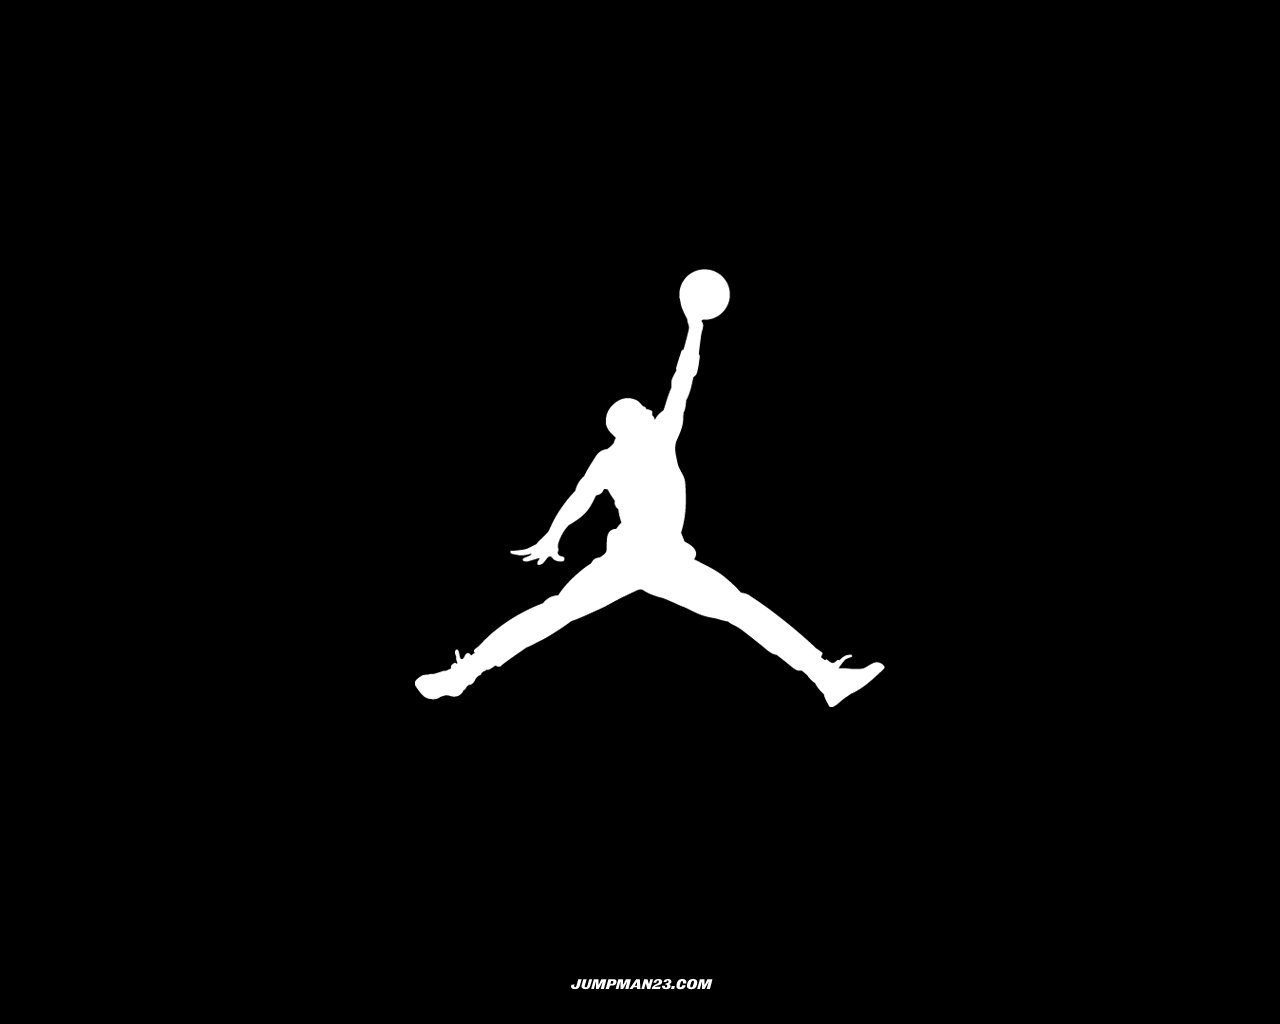 Michael Jordan Wallpaper Celebrity And Movie Pictures Photos